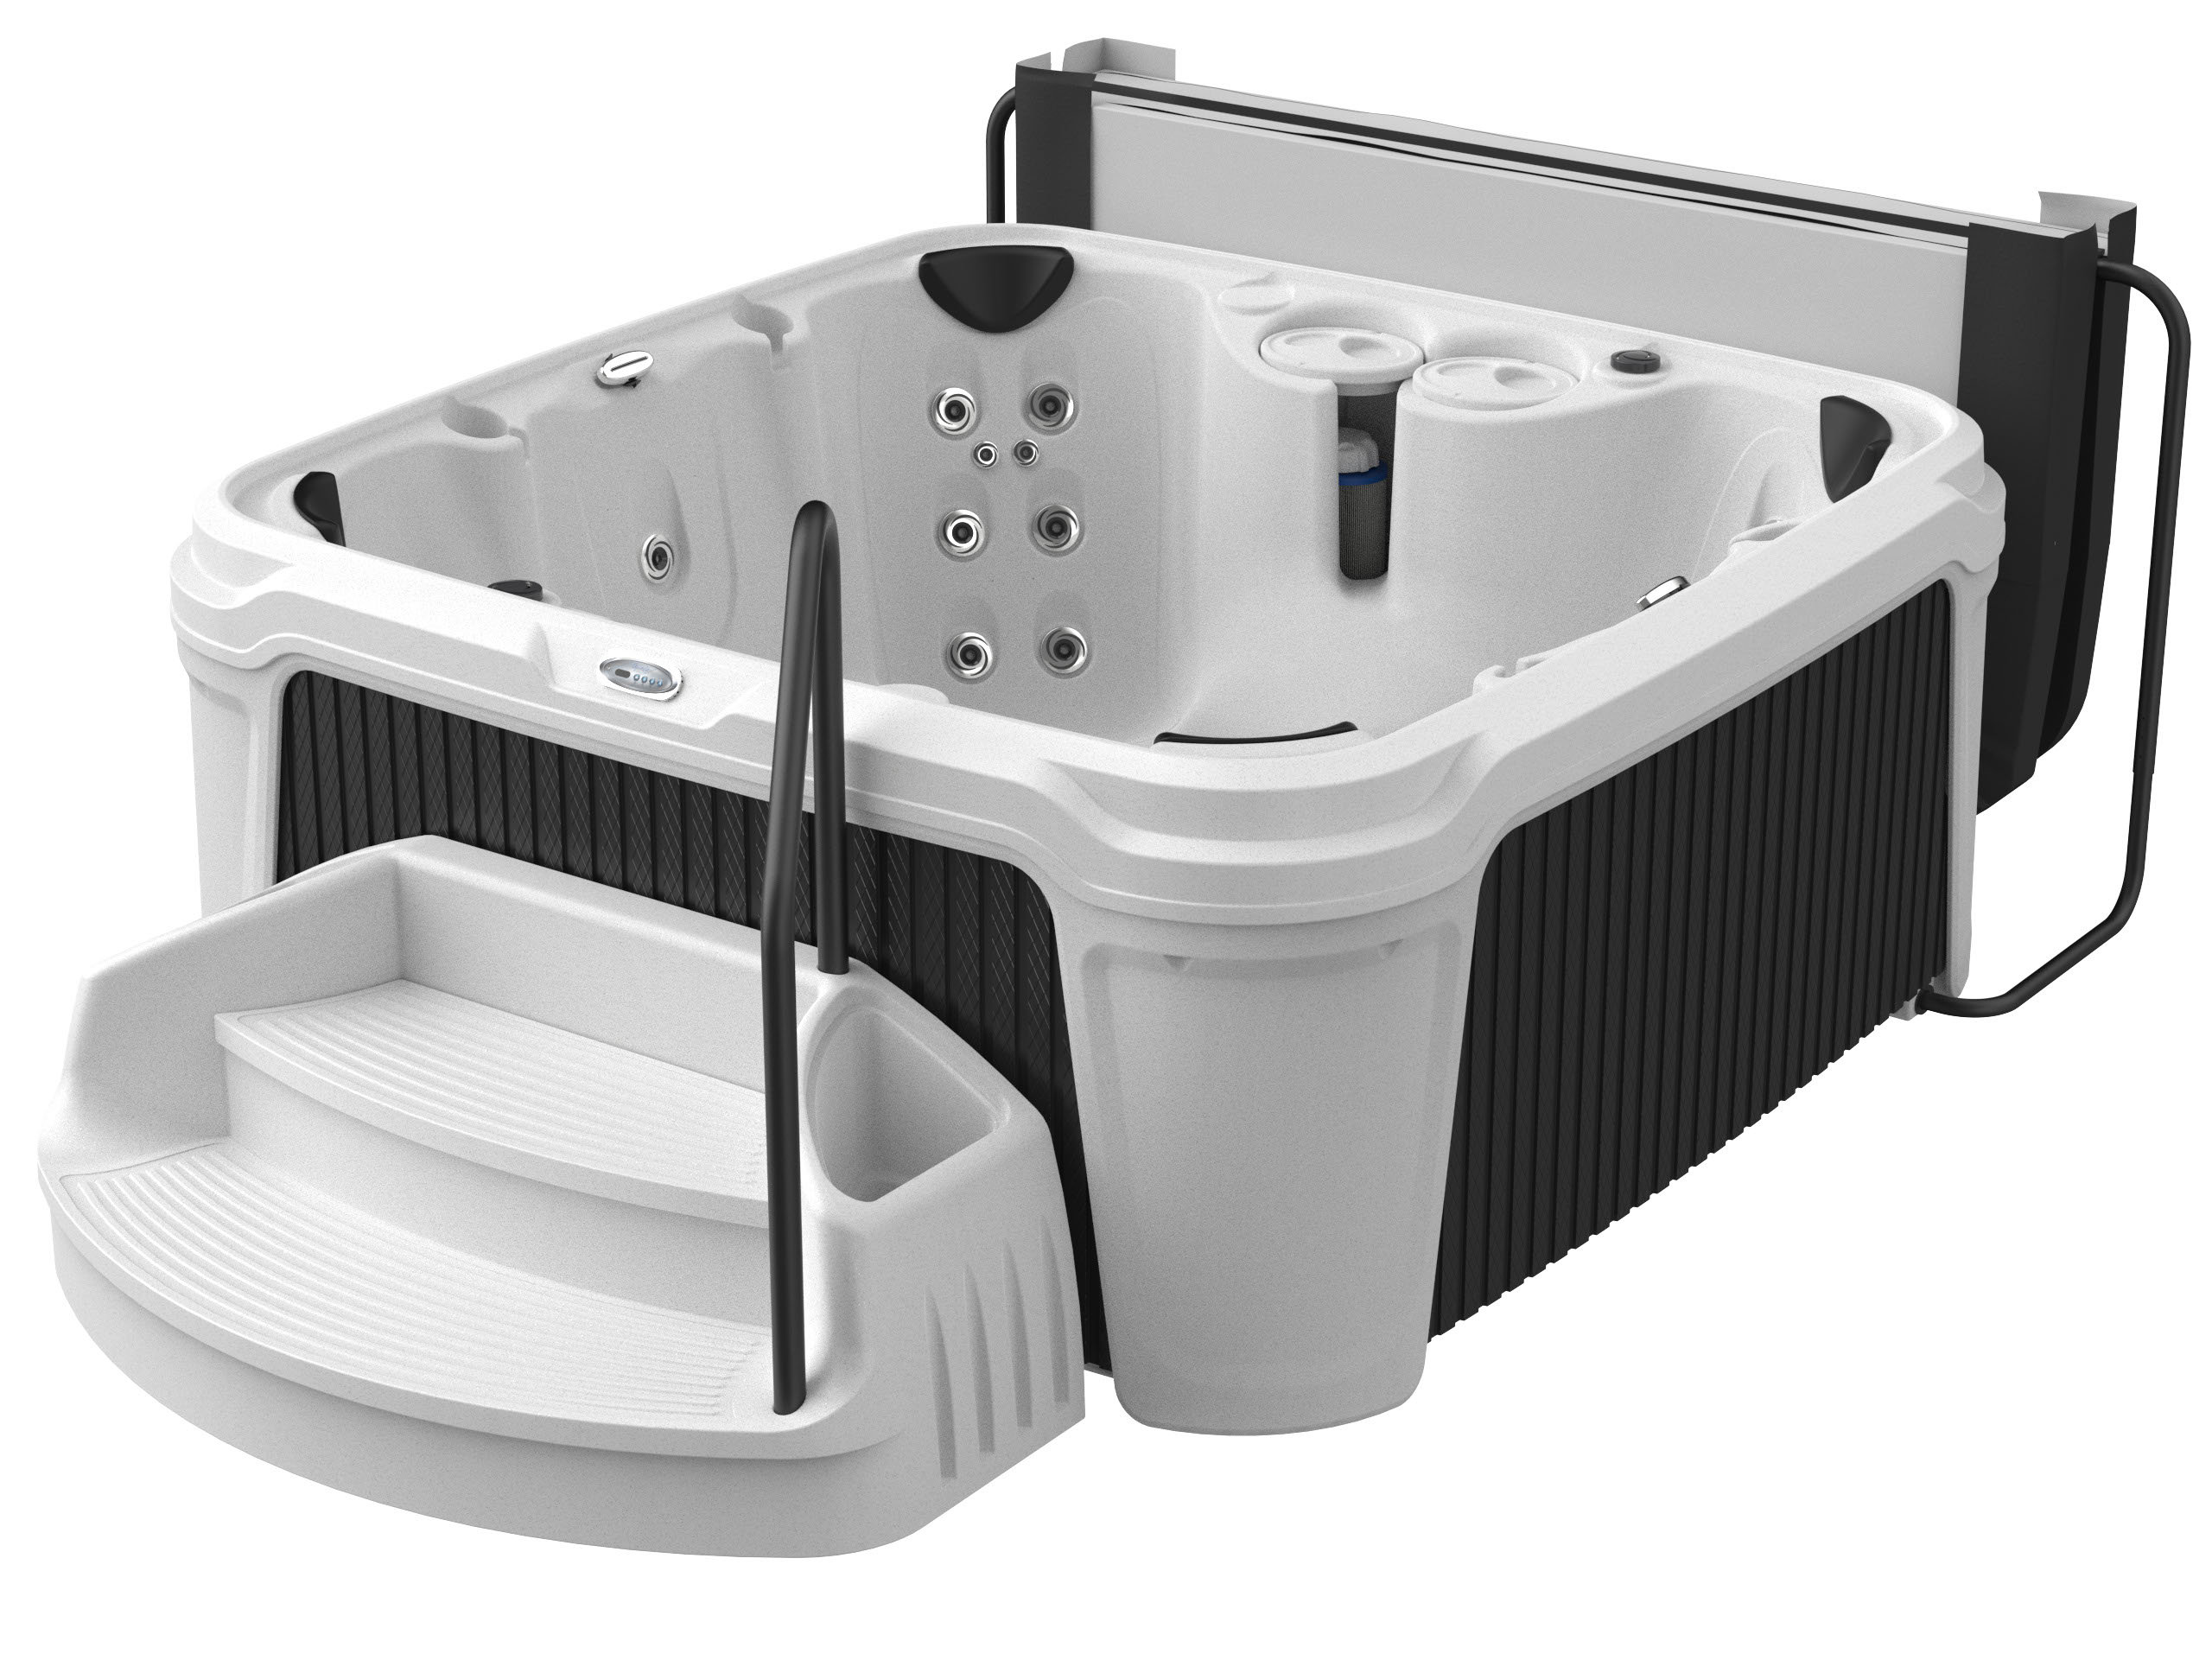 Multi Function Bath System With All Jacuzzi Function Bath Cabin